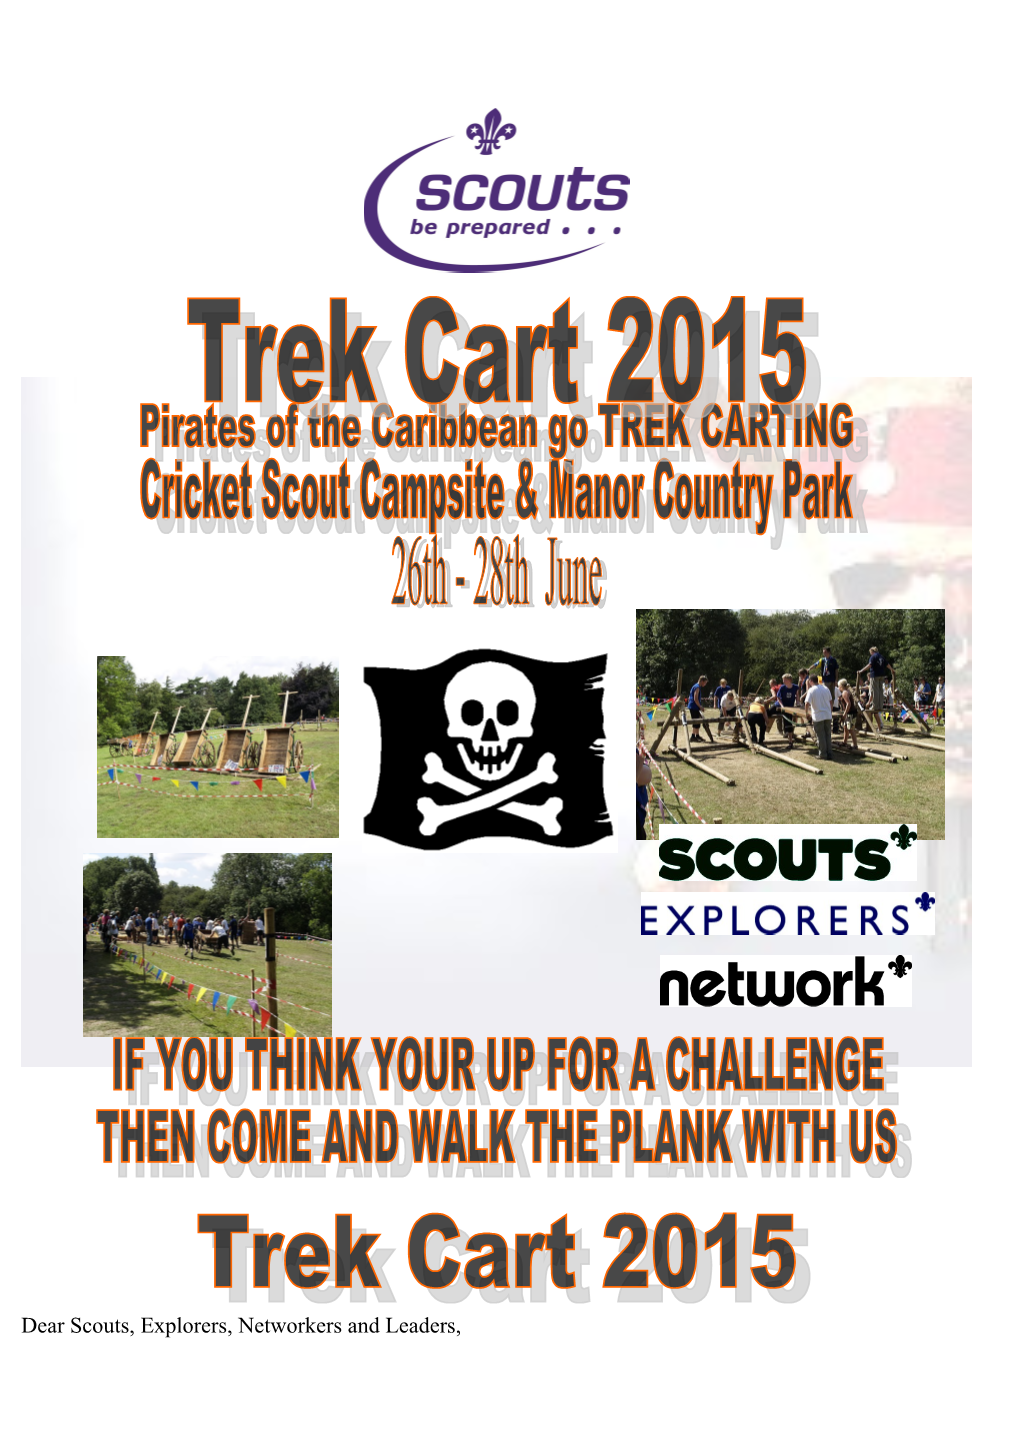 Welcome to Trek Cart 2015 Pirates of the Caribbean